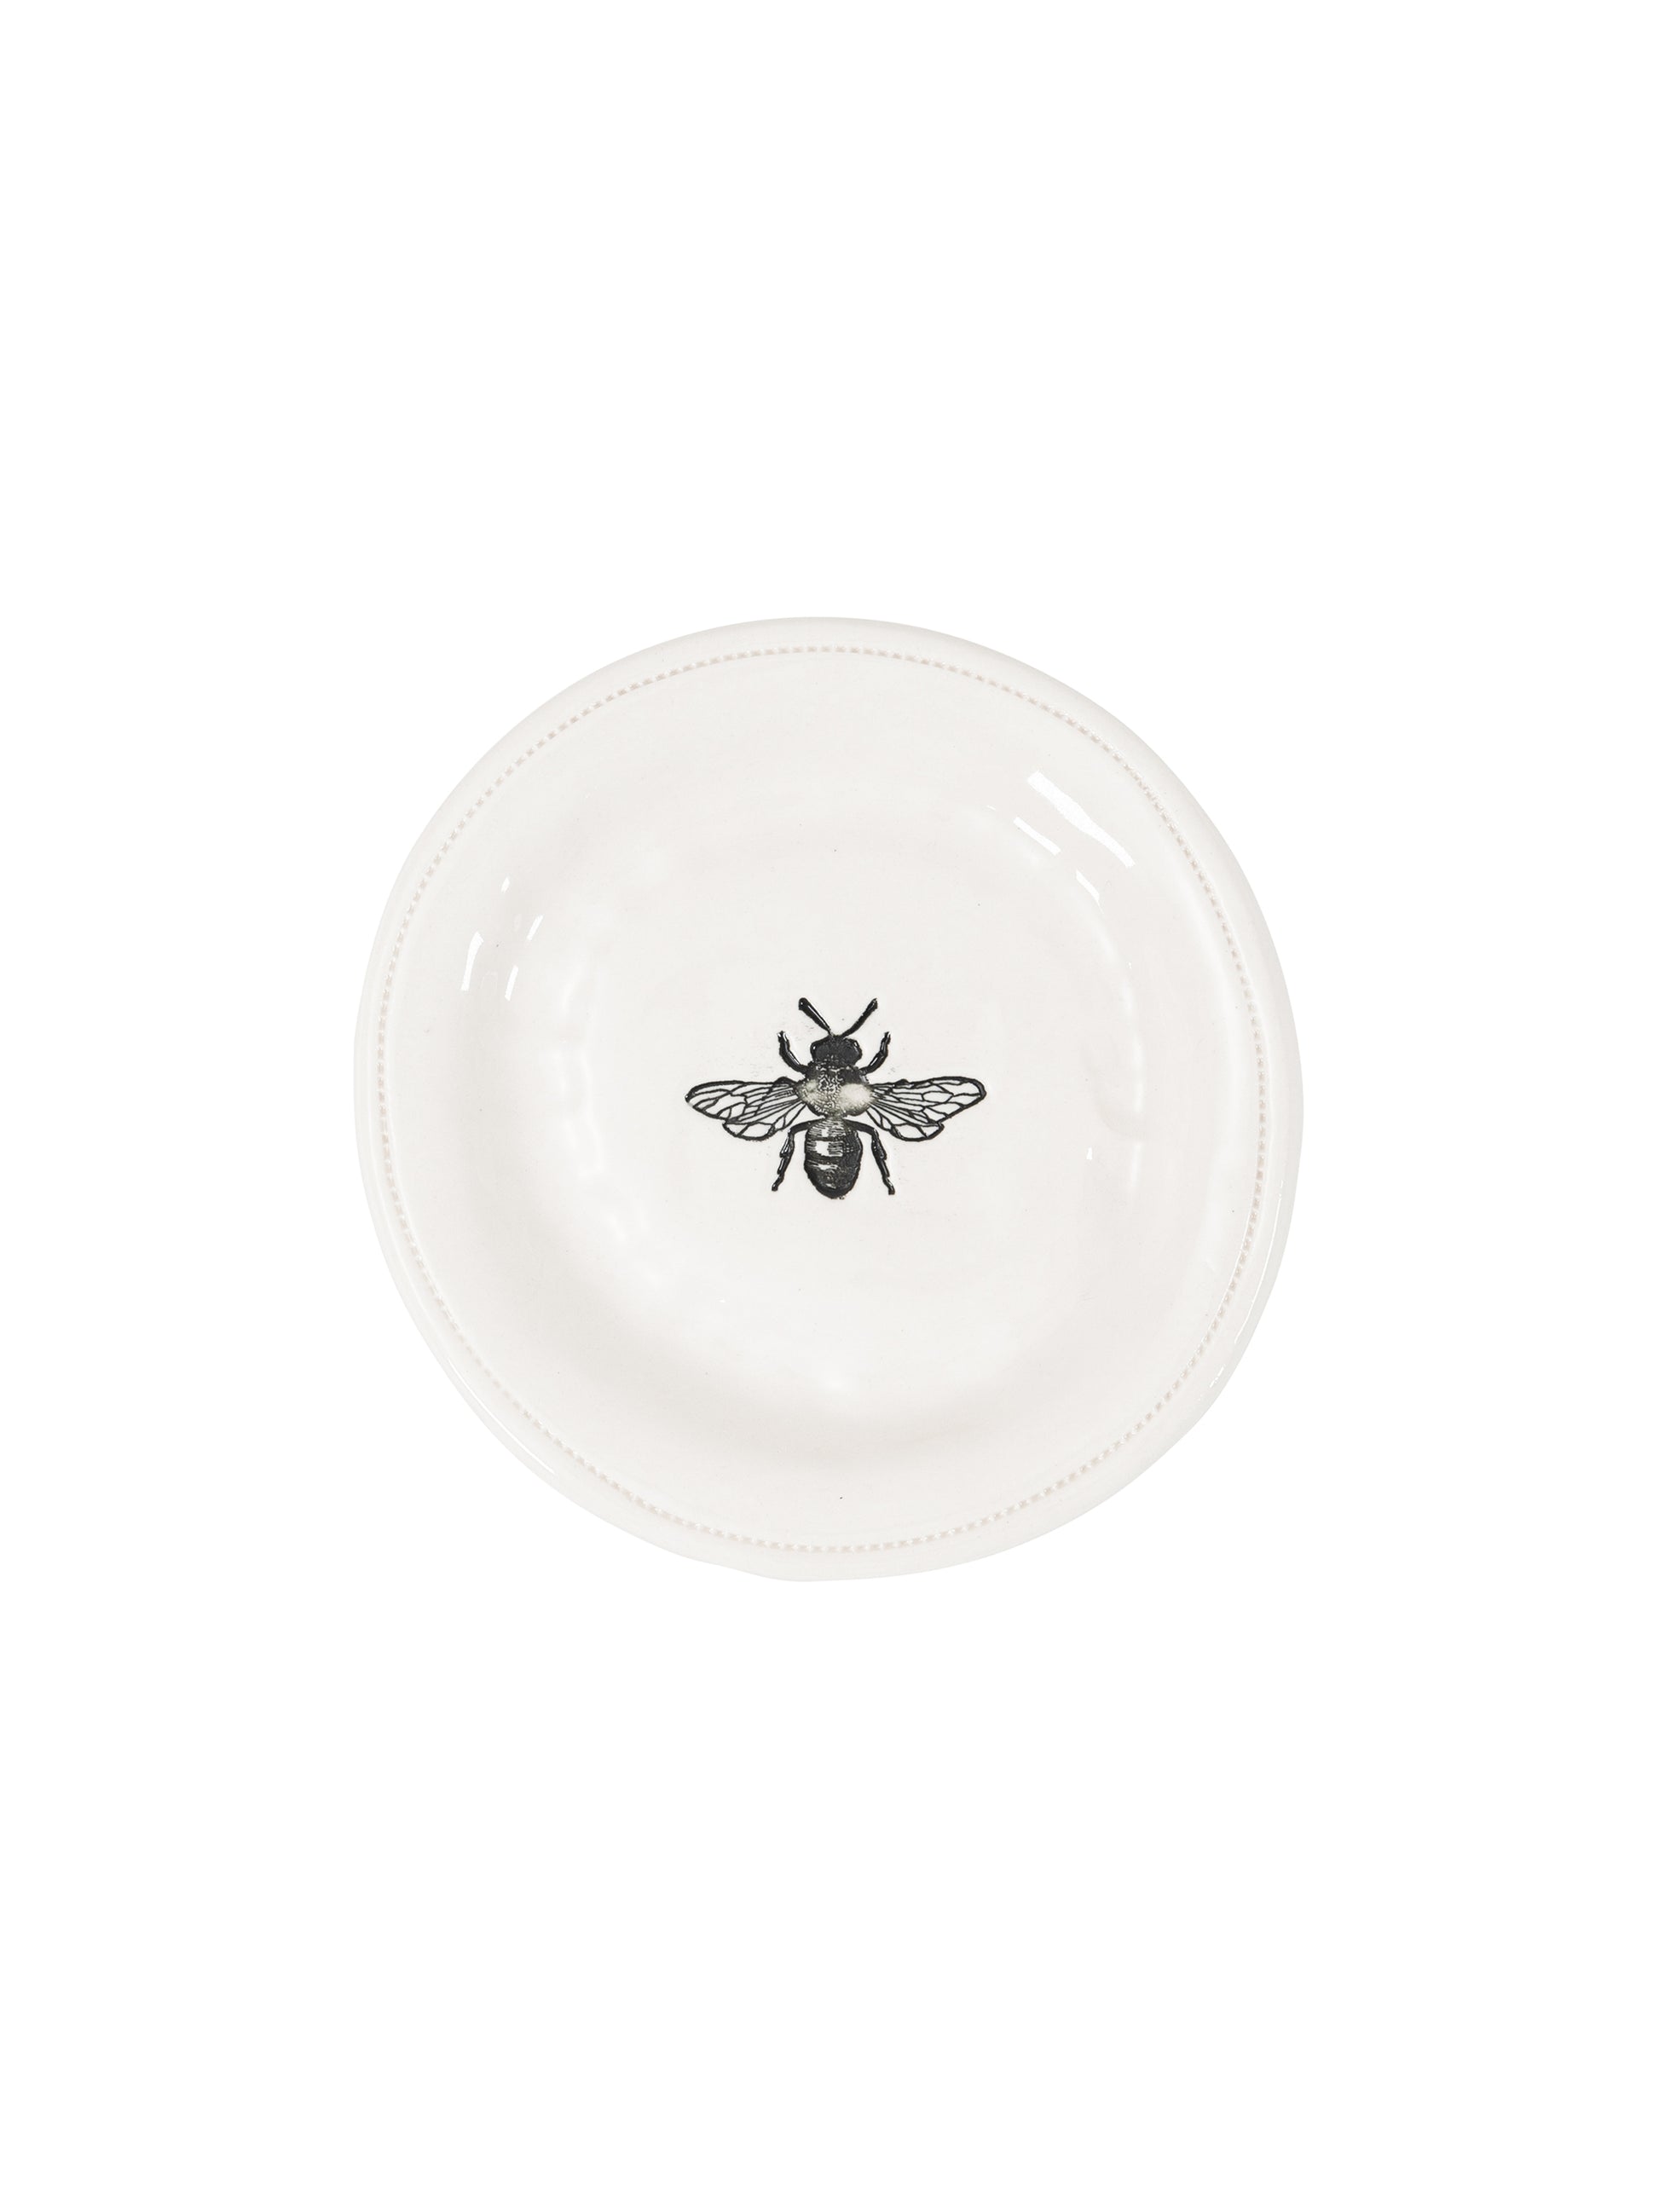 WT Bee and Hive Canapé Plate Set Weston Table